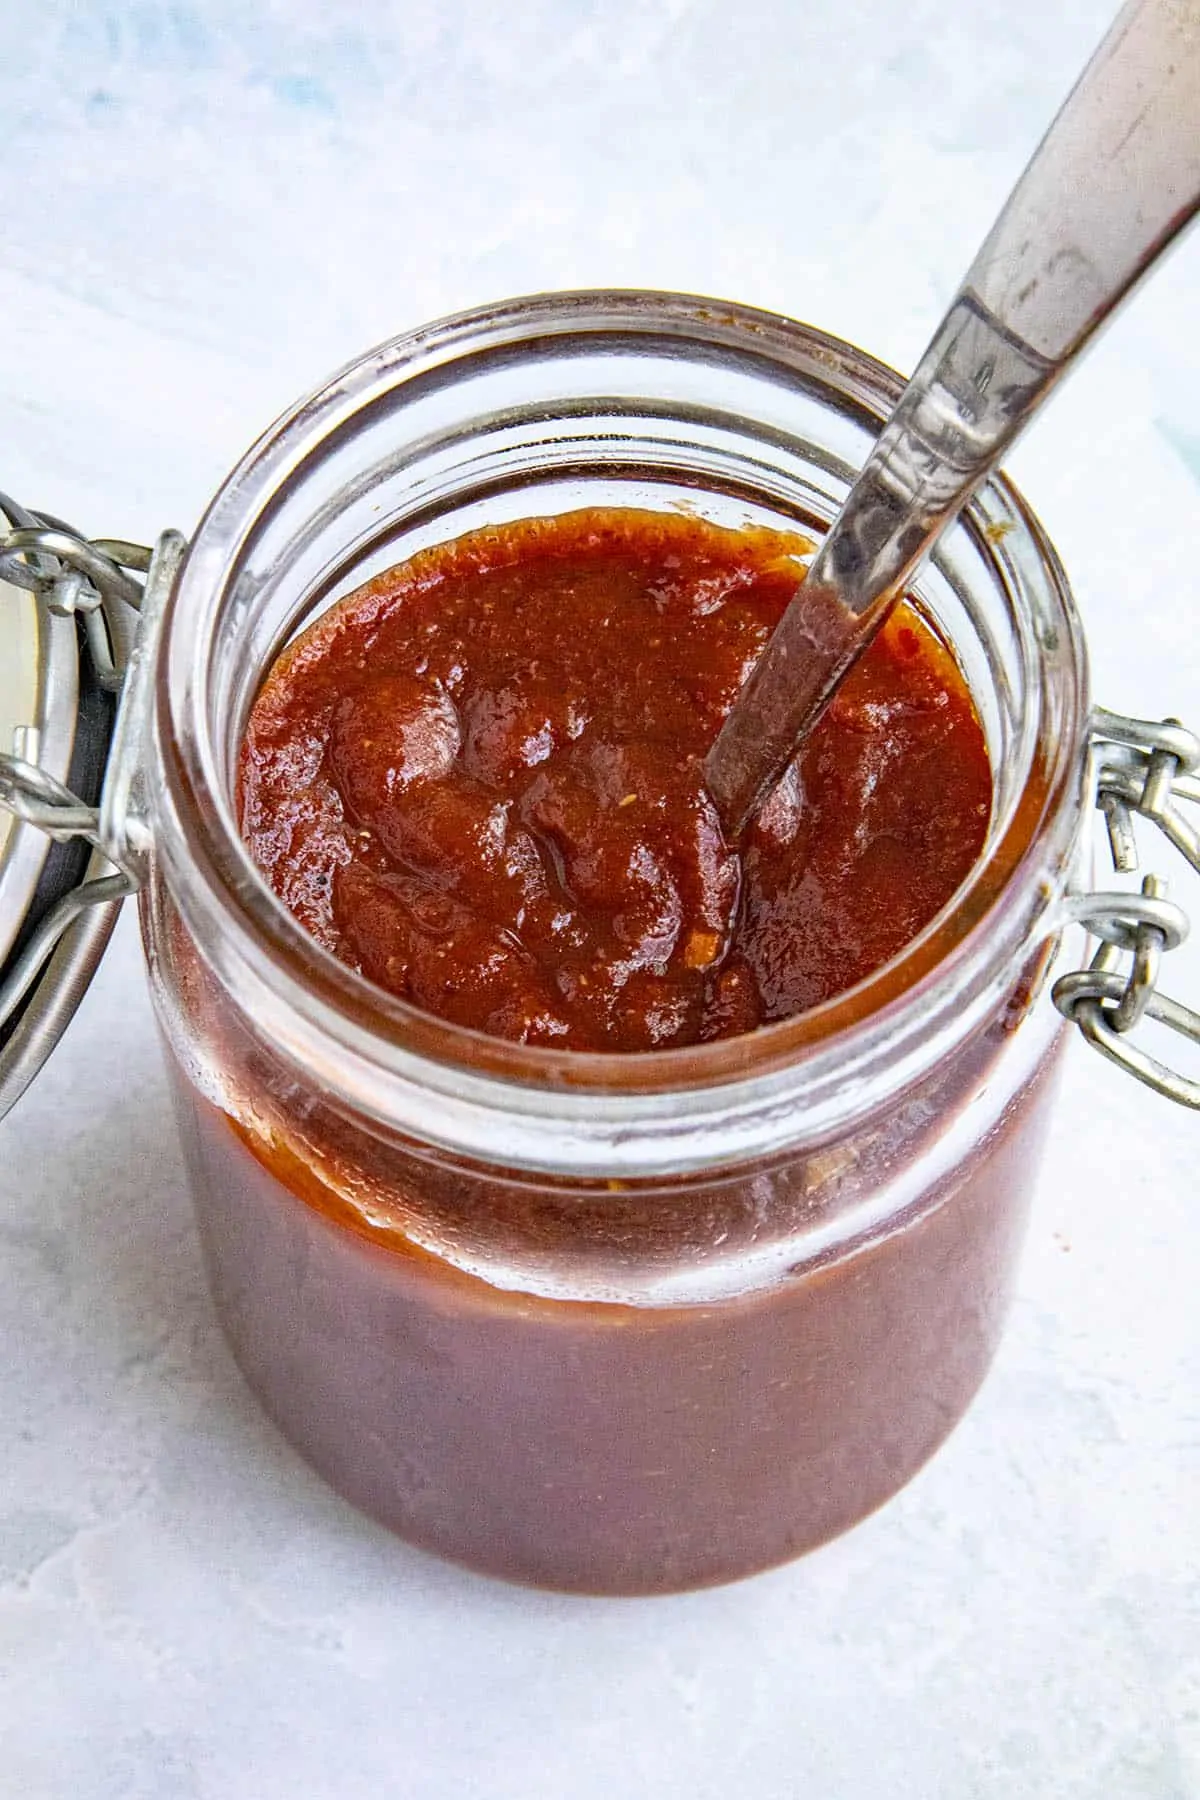 Homemade Chili Sauce in a jar with a spoon